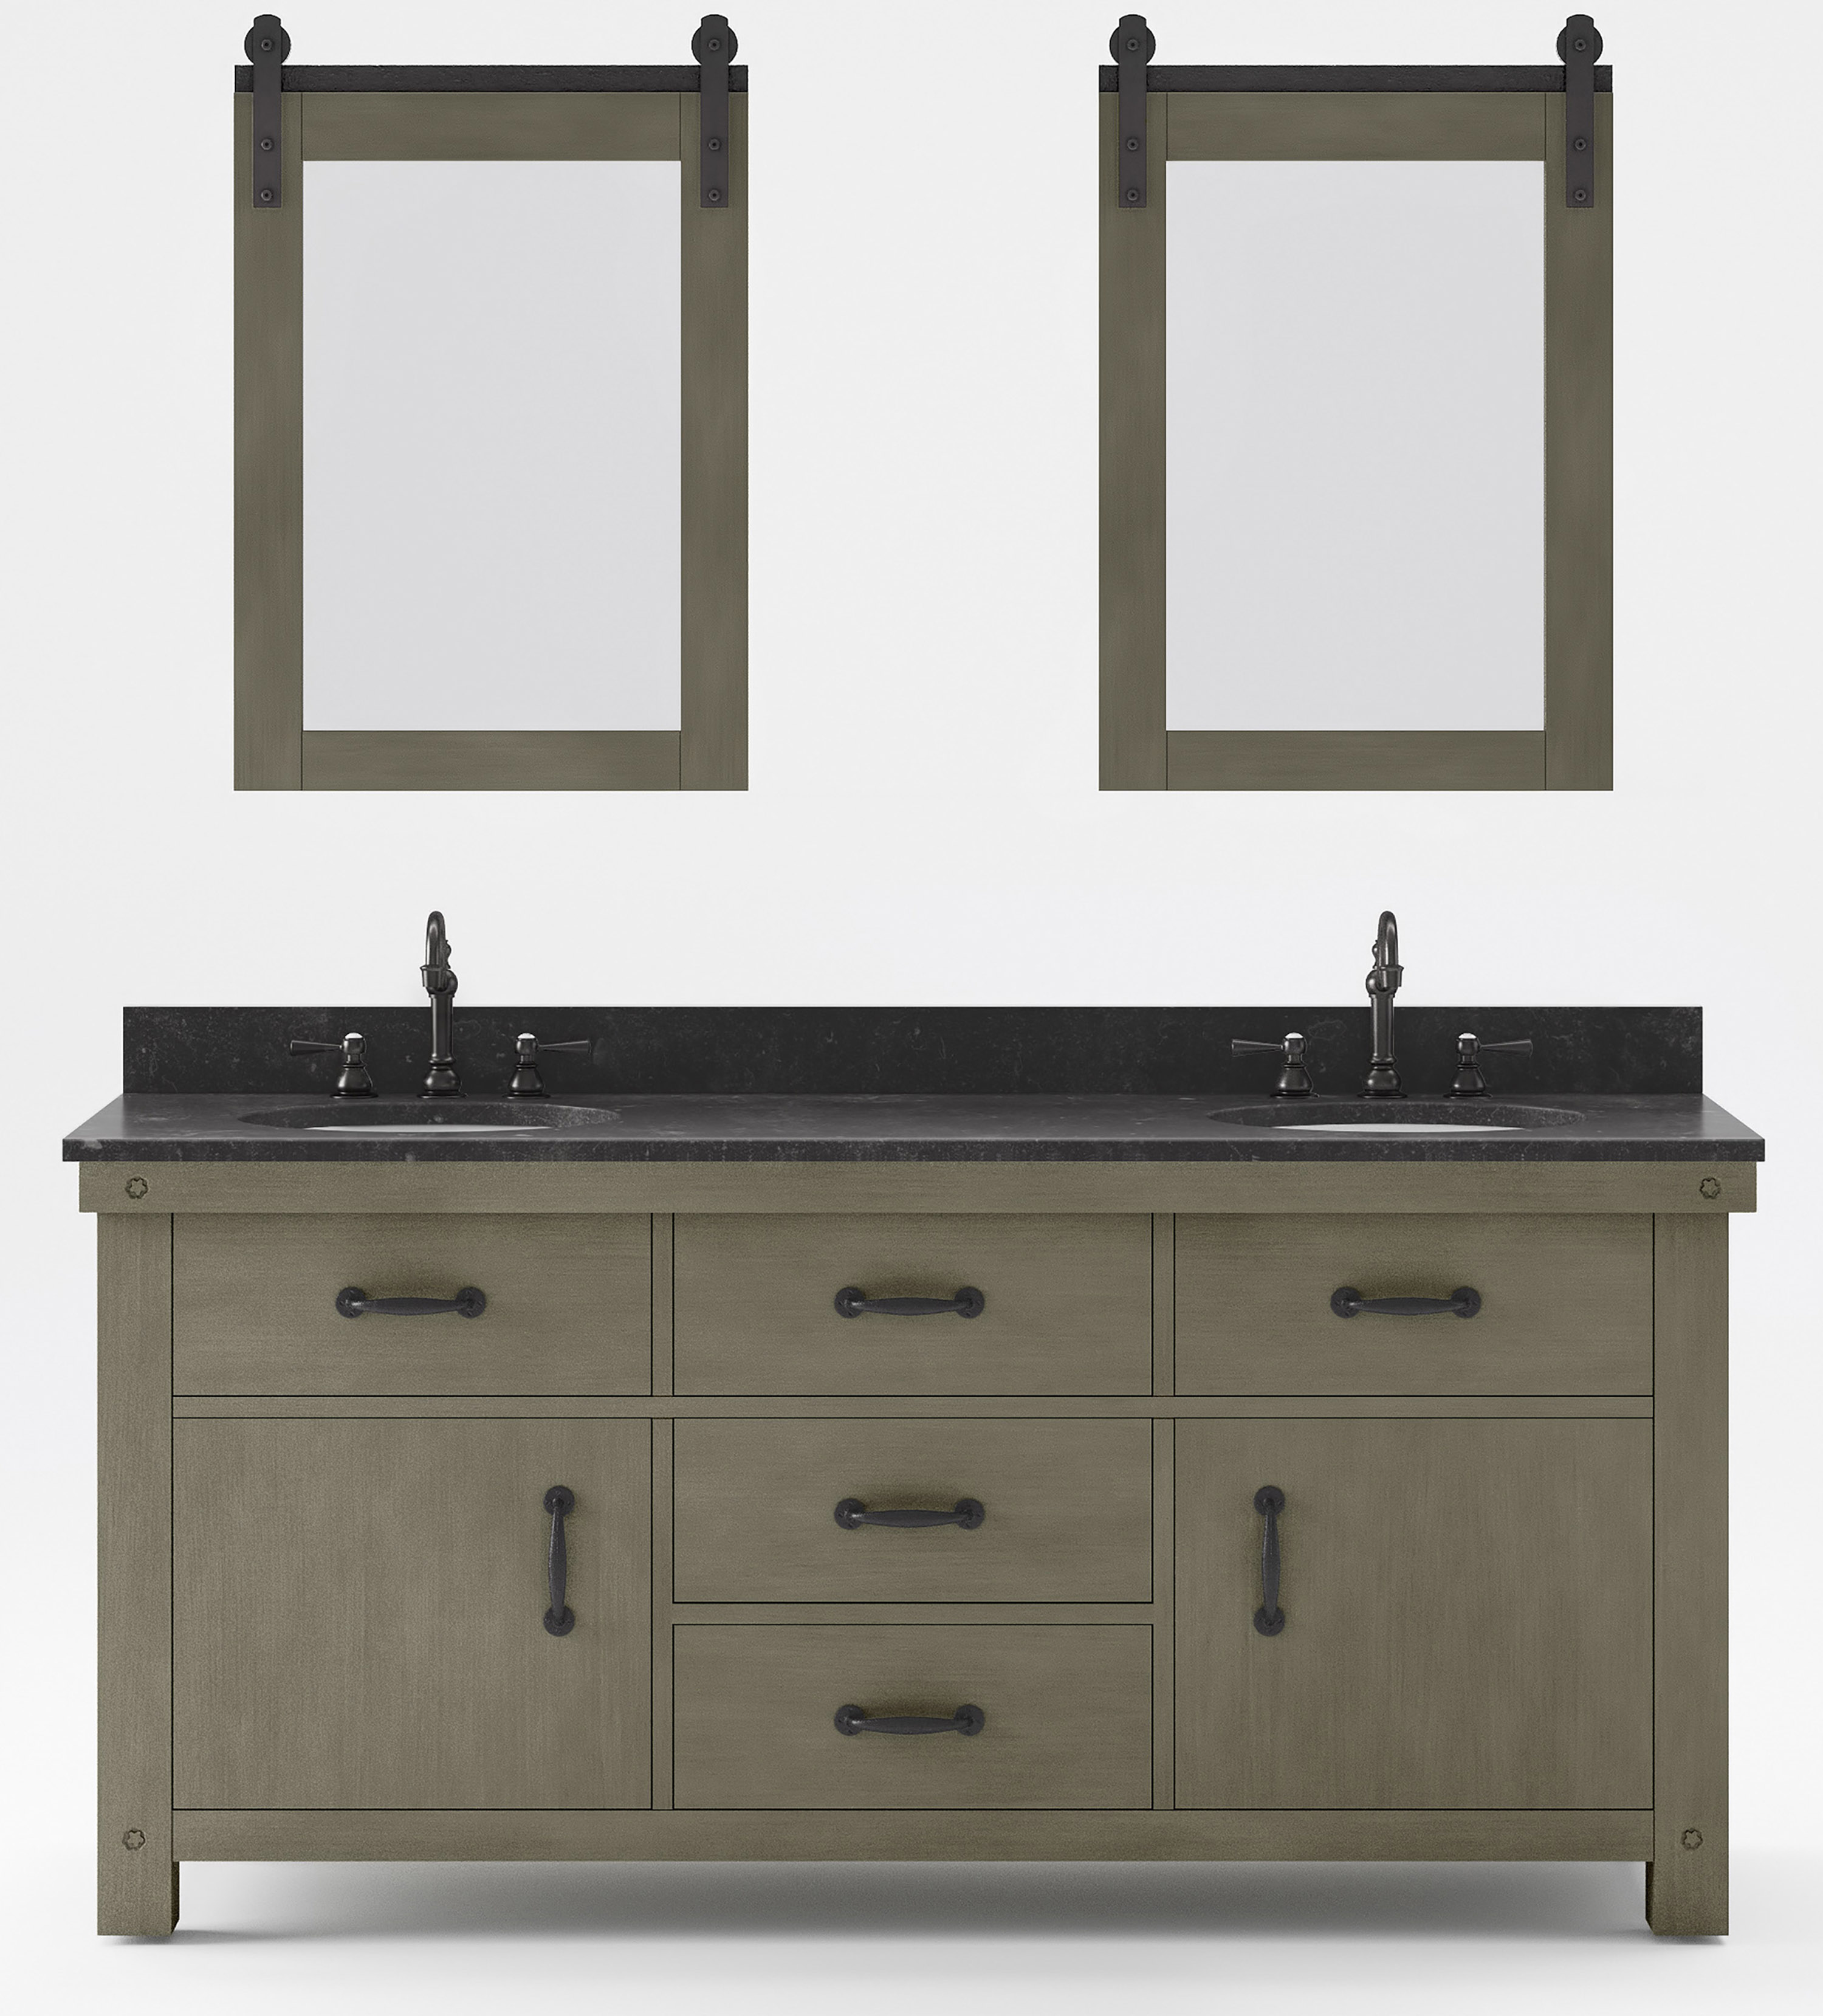 72" Double Sink Blue Limestone Countertop Vanity in Grizzle Gray with Mirror with Faucet Options